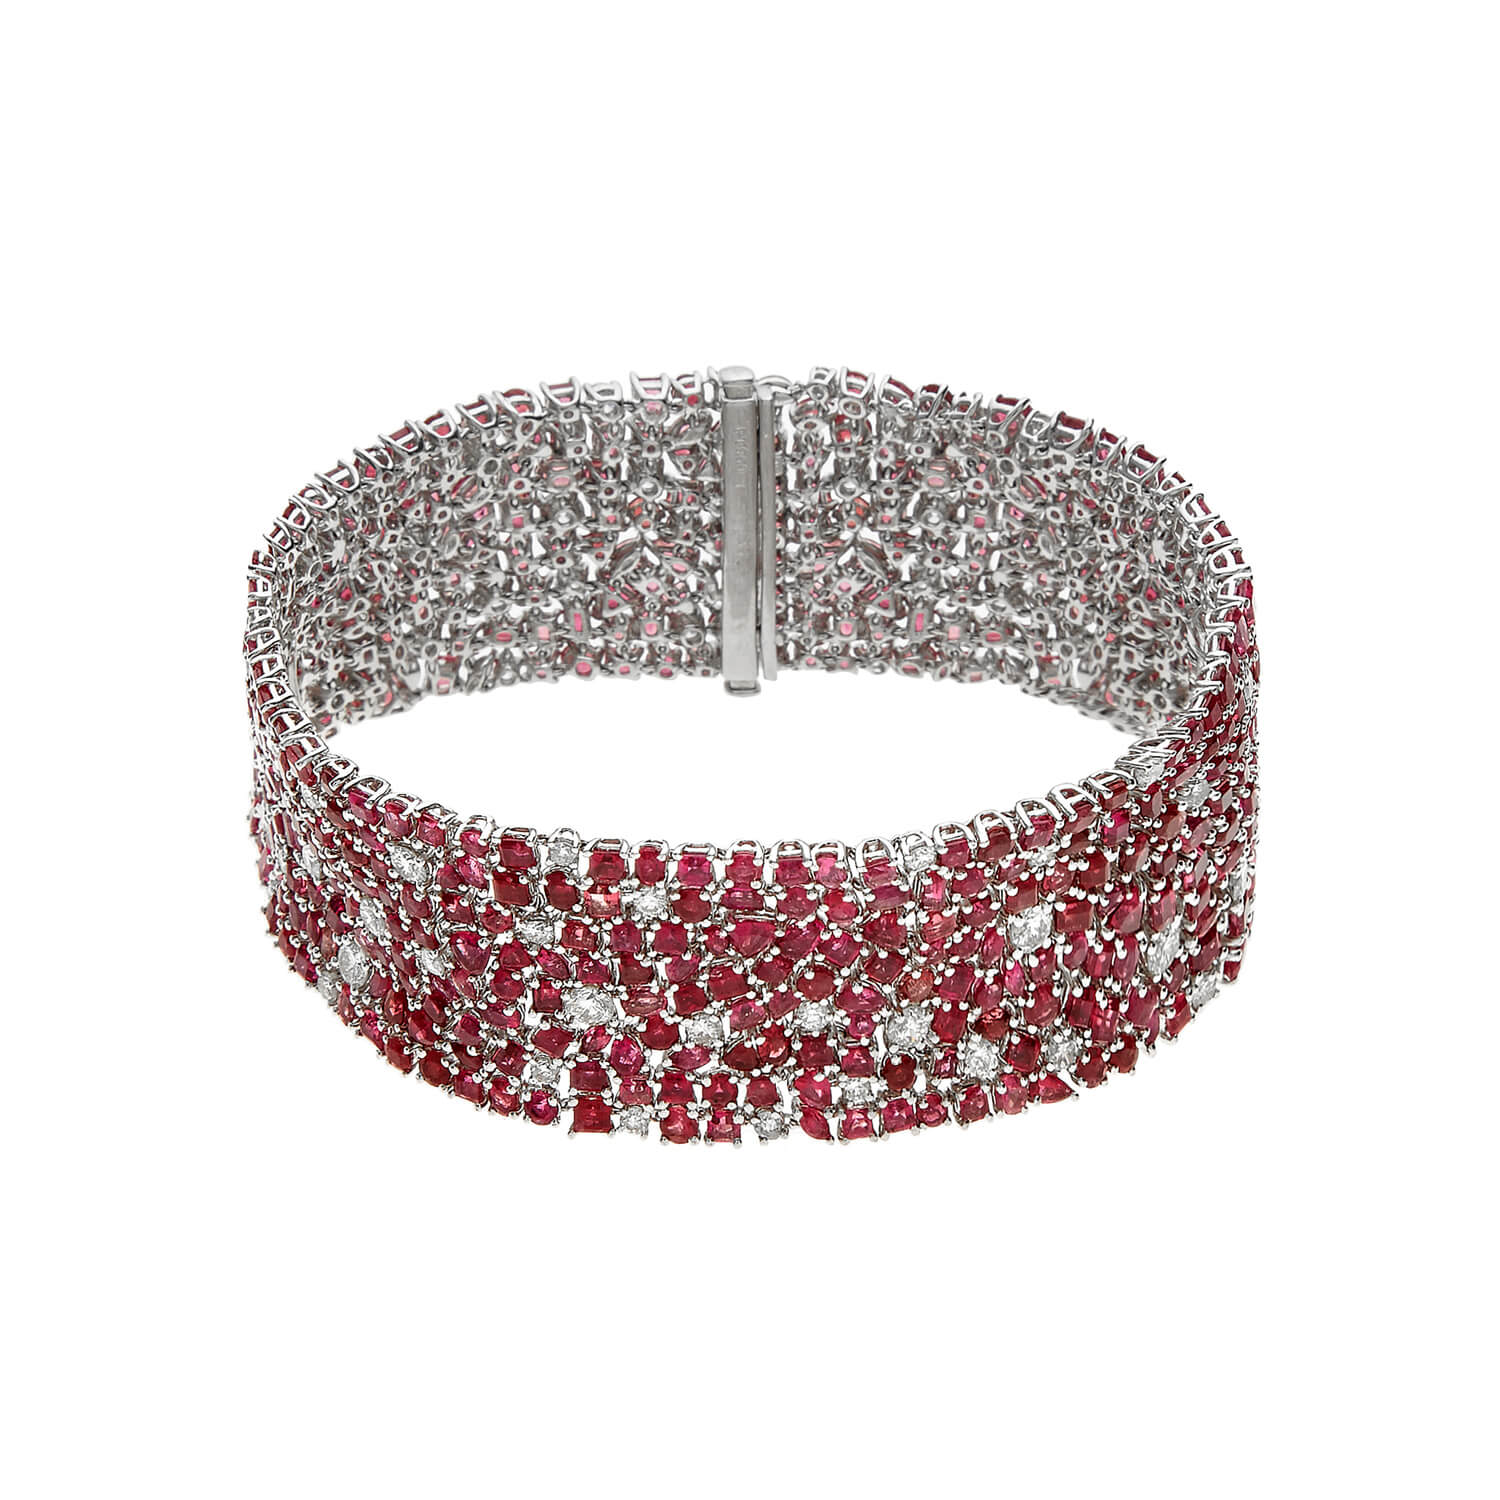 A magenta colored bracelet with gems on it